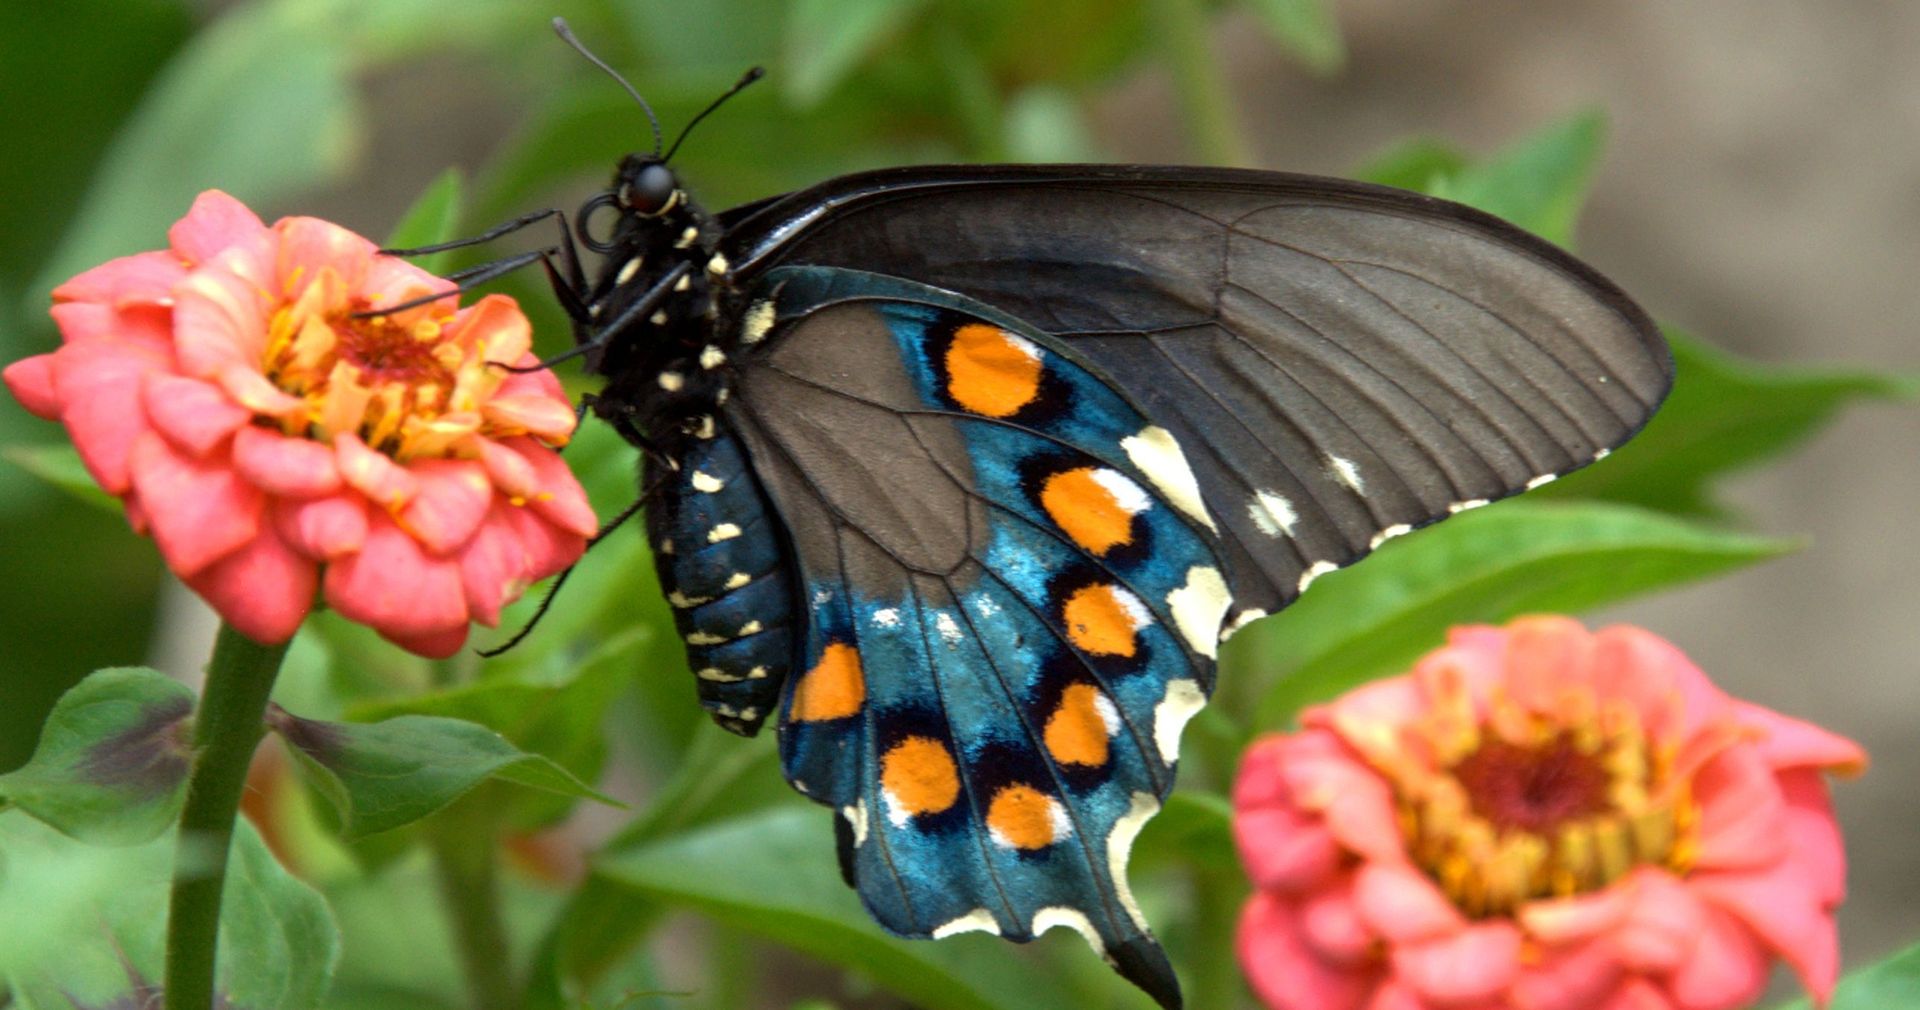 A picture of a butterly on a flower.